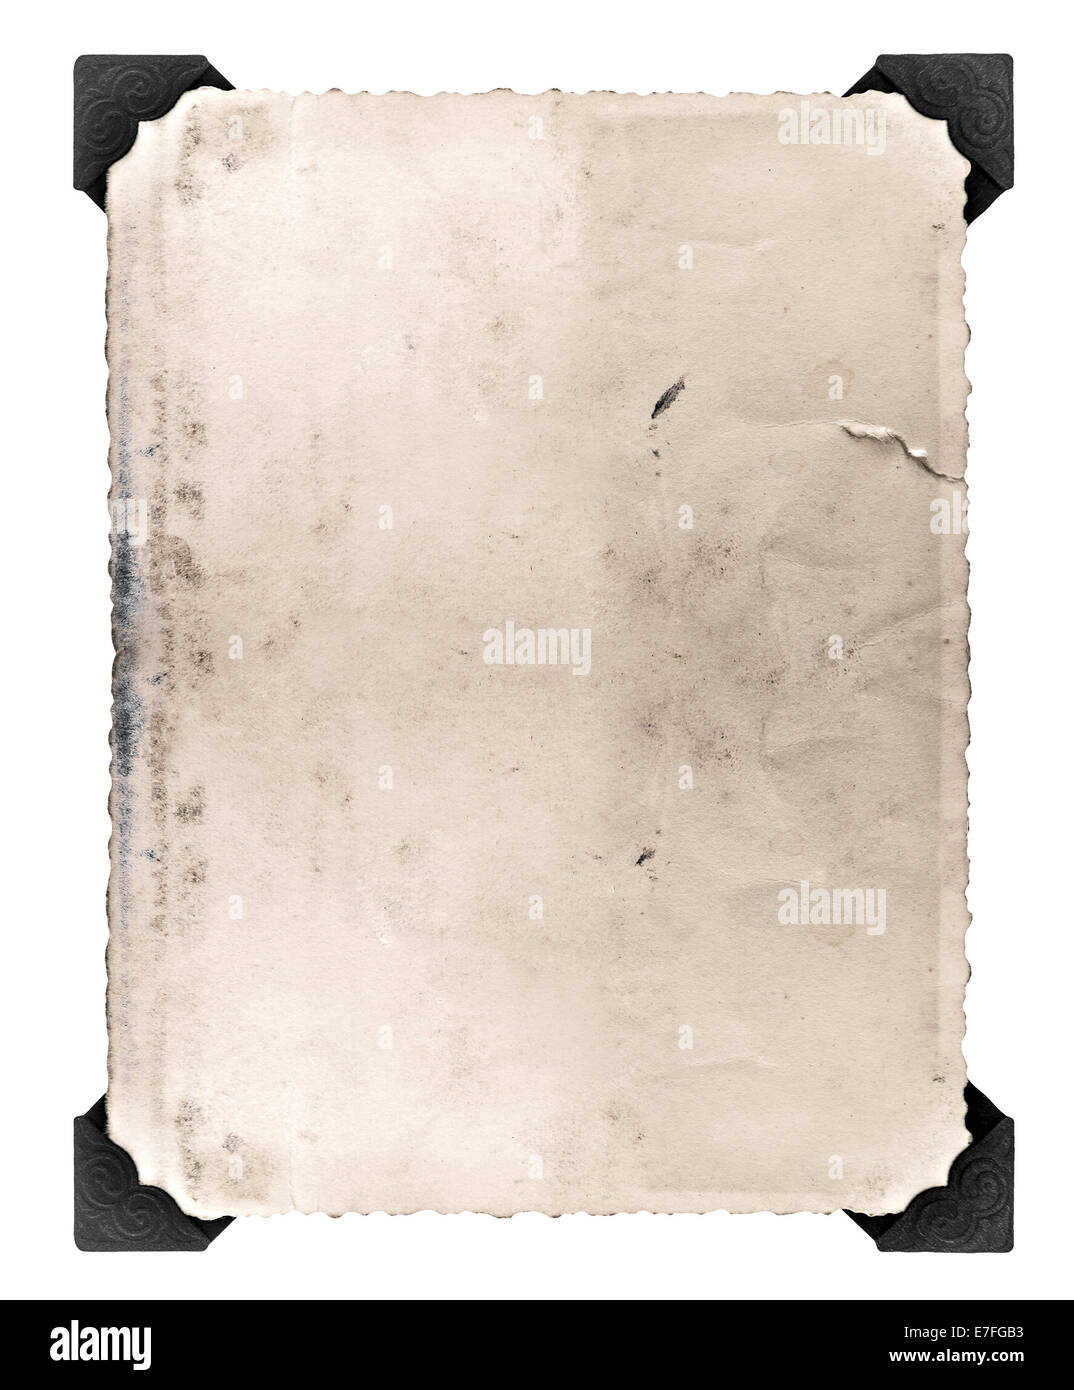 https://c8.alamy.com/comp/E7FGB3/vintage-photo-with-corner-isolated-on-white-background-aged-paper-E7FGB3.jpg